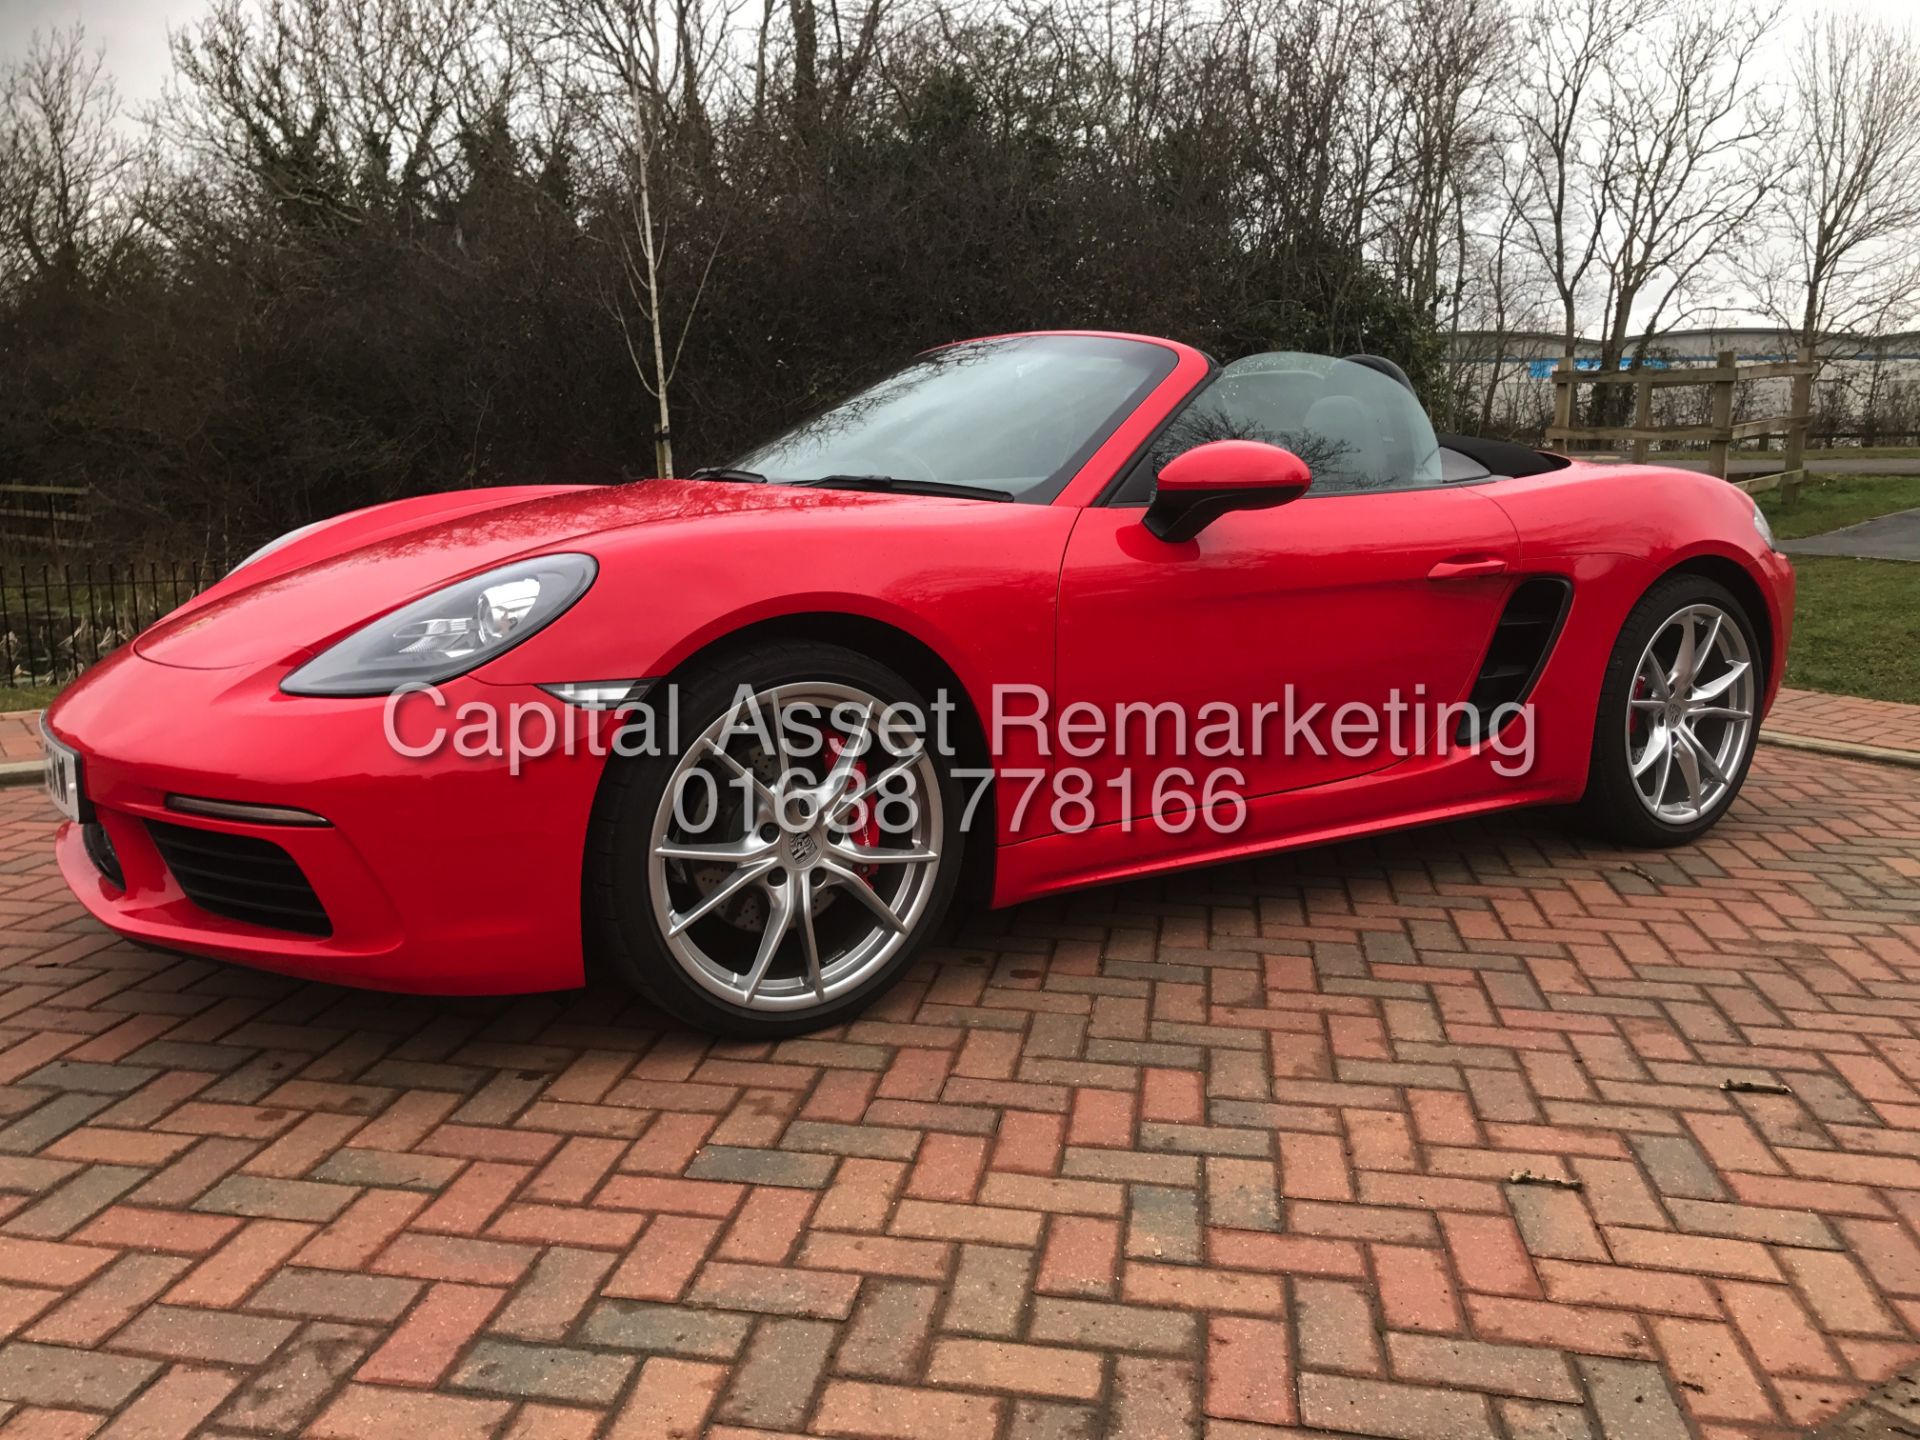 (ON SALE) PORSCHE BOXSTER S (718)CONVERTIBLE (17REG) NEW SHAPE-350 BHP-PDK AUTO' (1 OWNER-LOW MILES) - Image 9 of 34